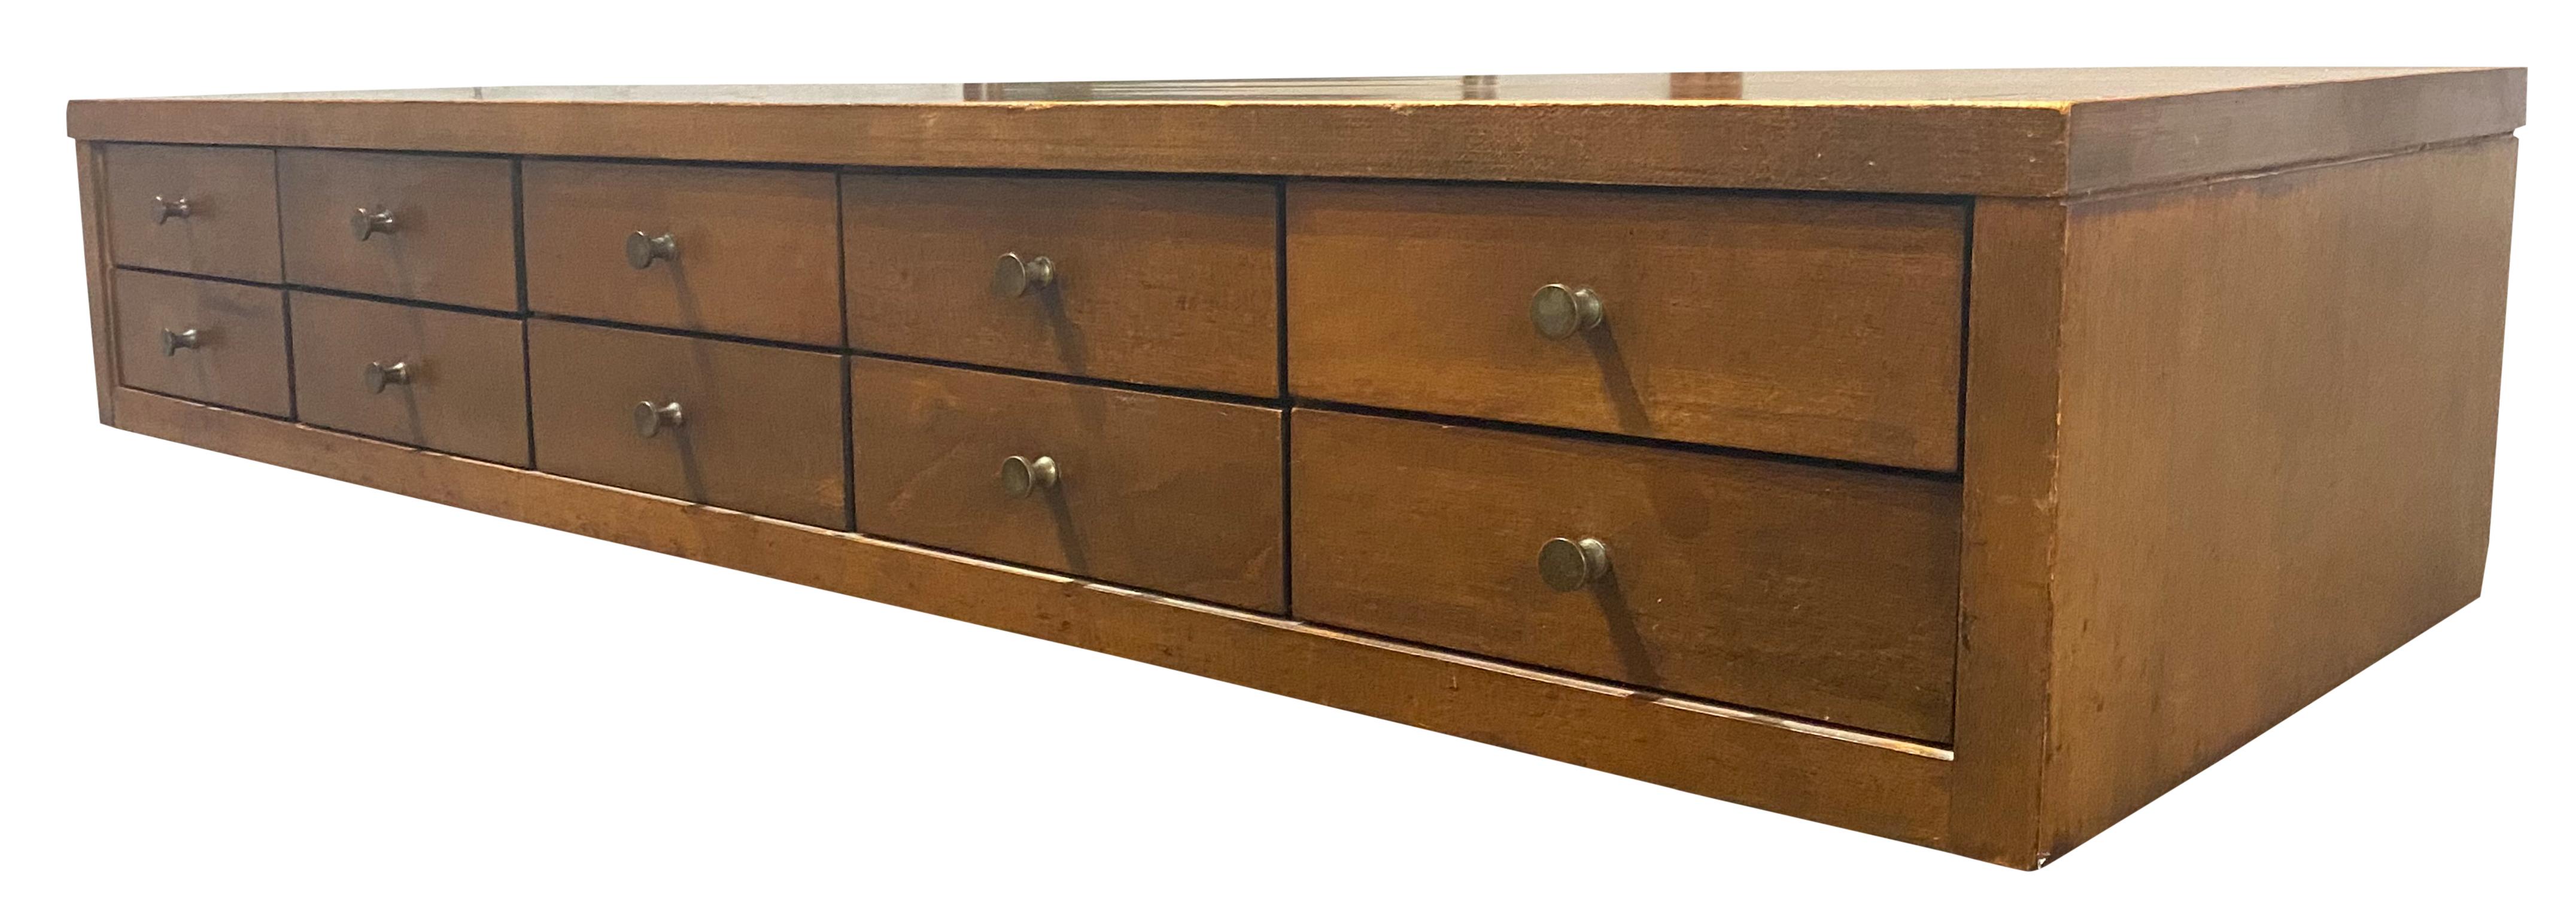 Mid-Century Modern Midcentury Paul McCobb #1502 Small Jewelry Chest 10-Drawer Maple Brass For Sale